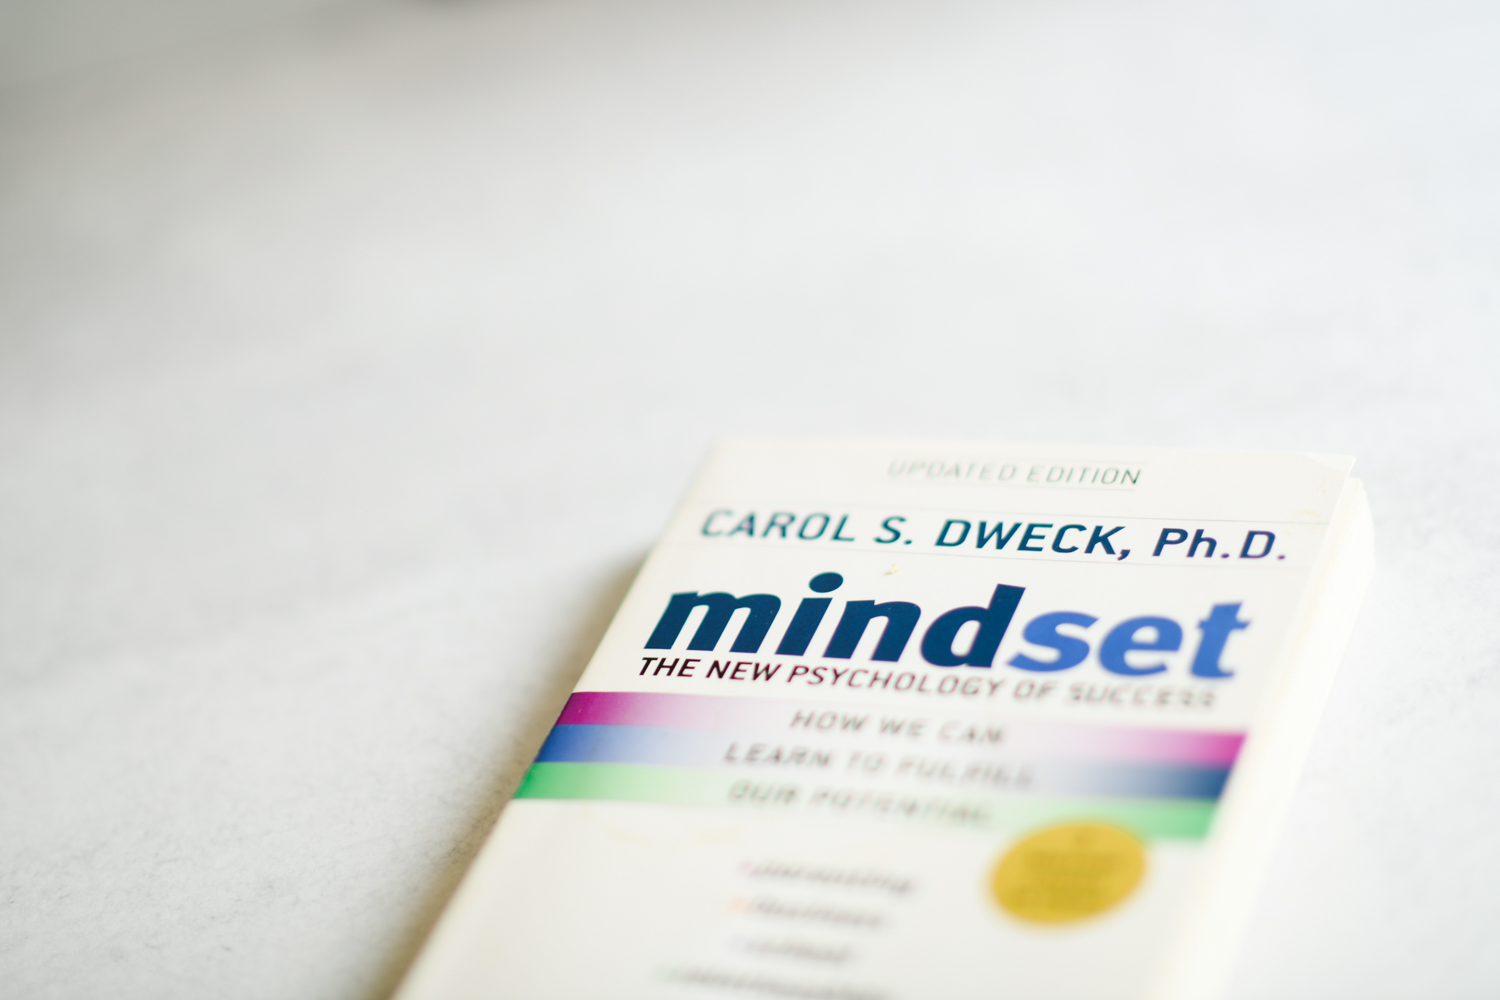 Brand Visibility with Growth Mindset